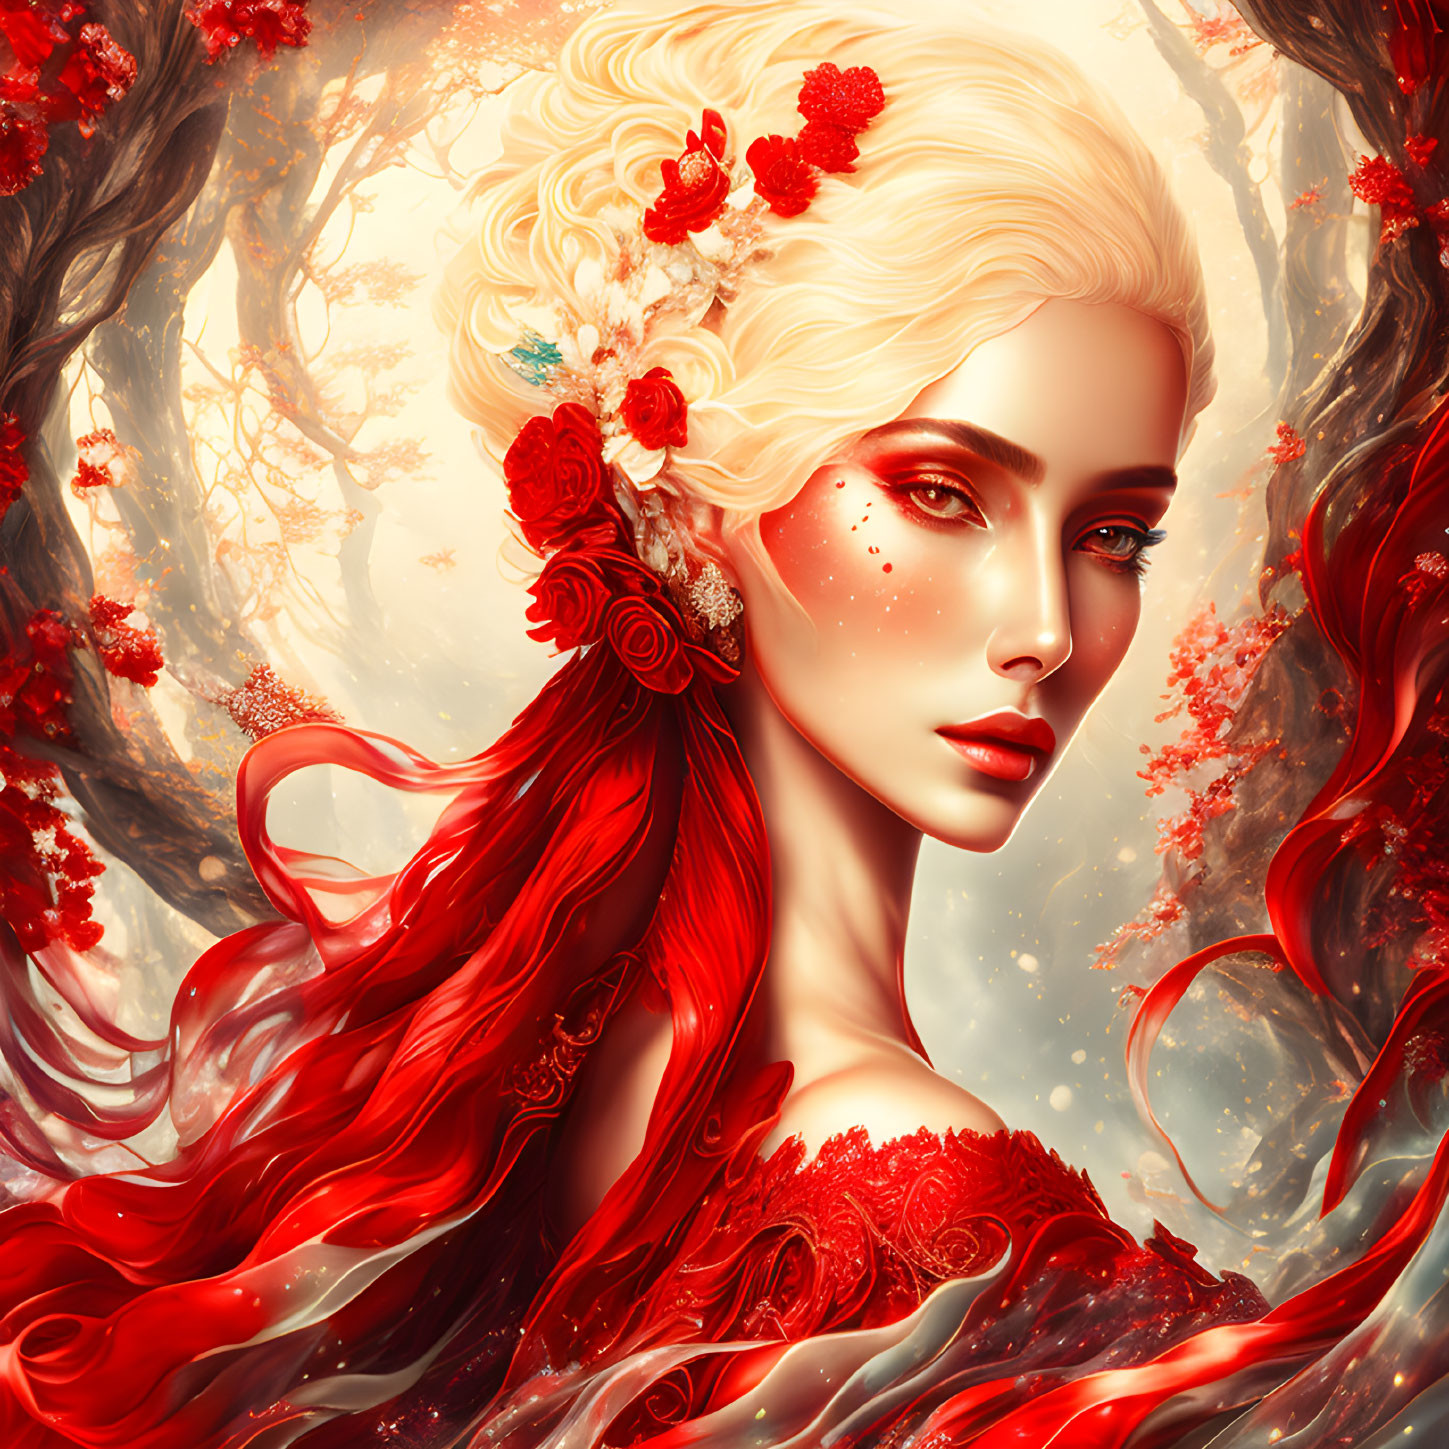 Fantastical portrait of woman with red hair and flowers in a surreal setting